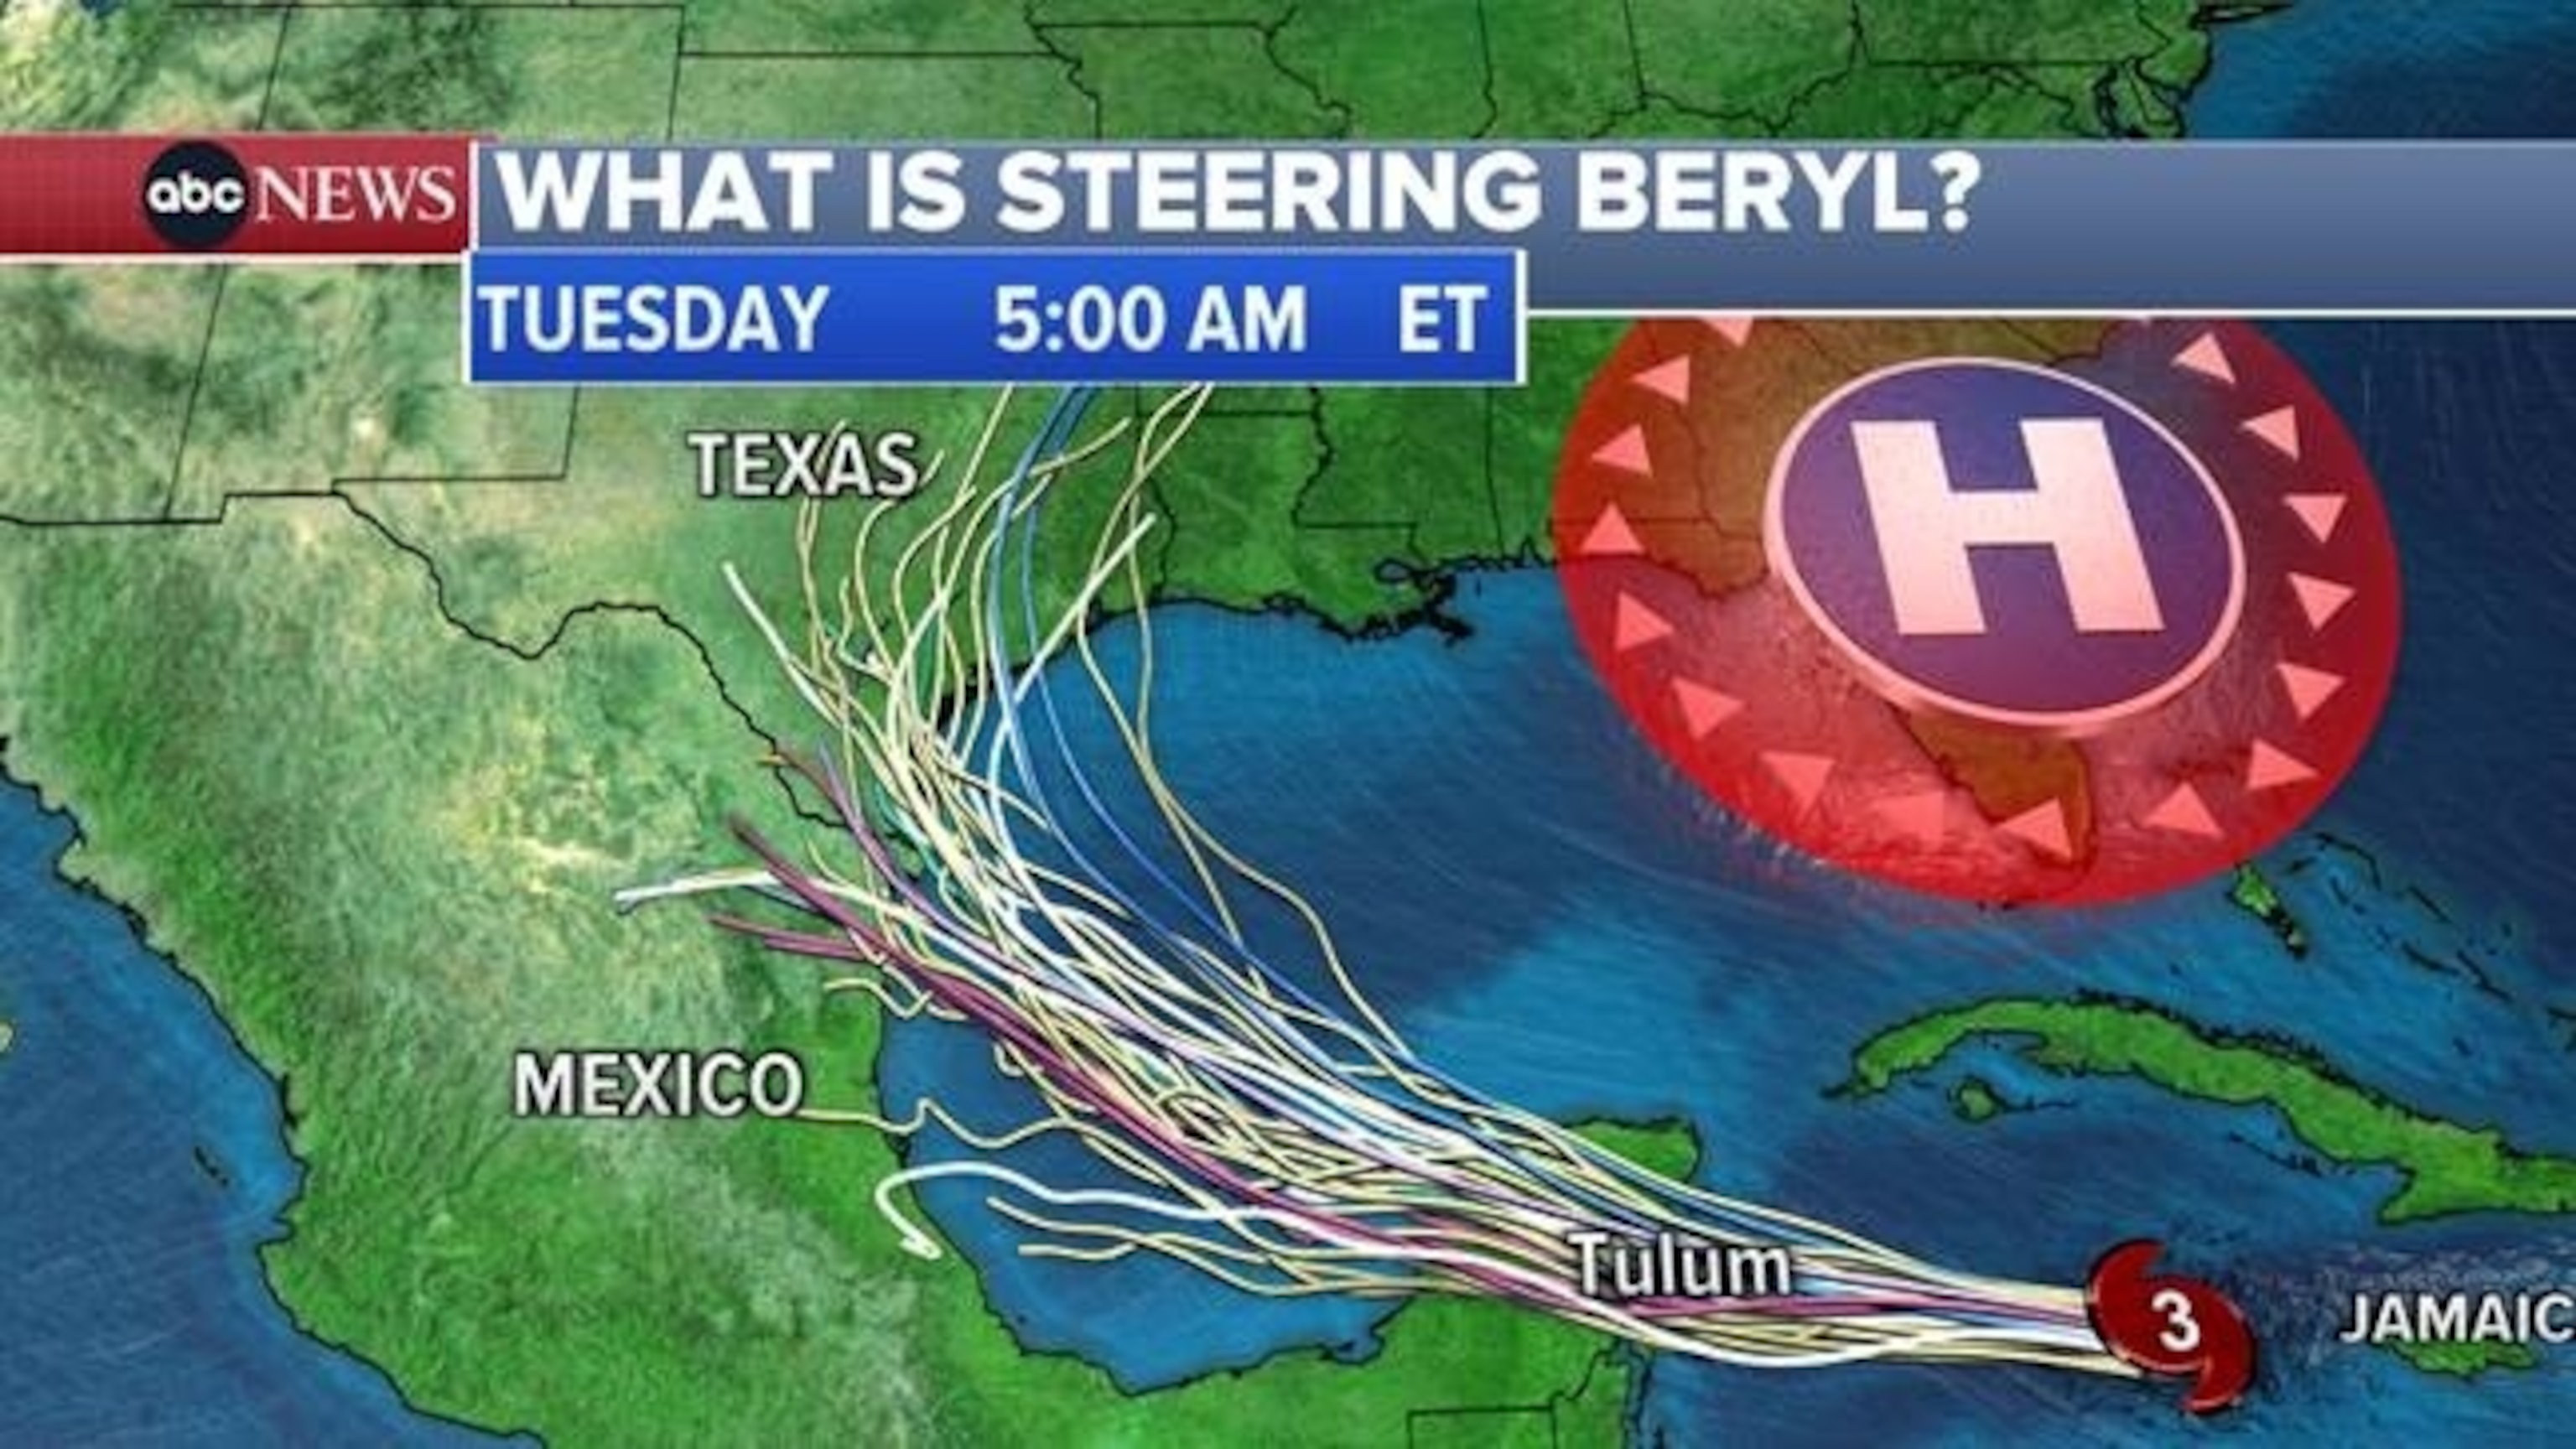 PHOTO: Moving past Jamaica, Beryl could make another landfall near the Mexico-U.S. border after crossing the Yucatan Peninsula.